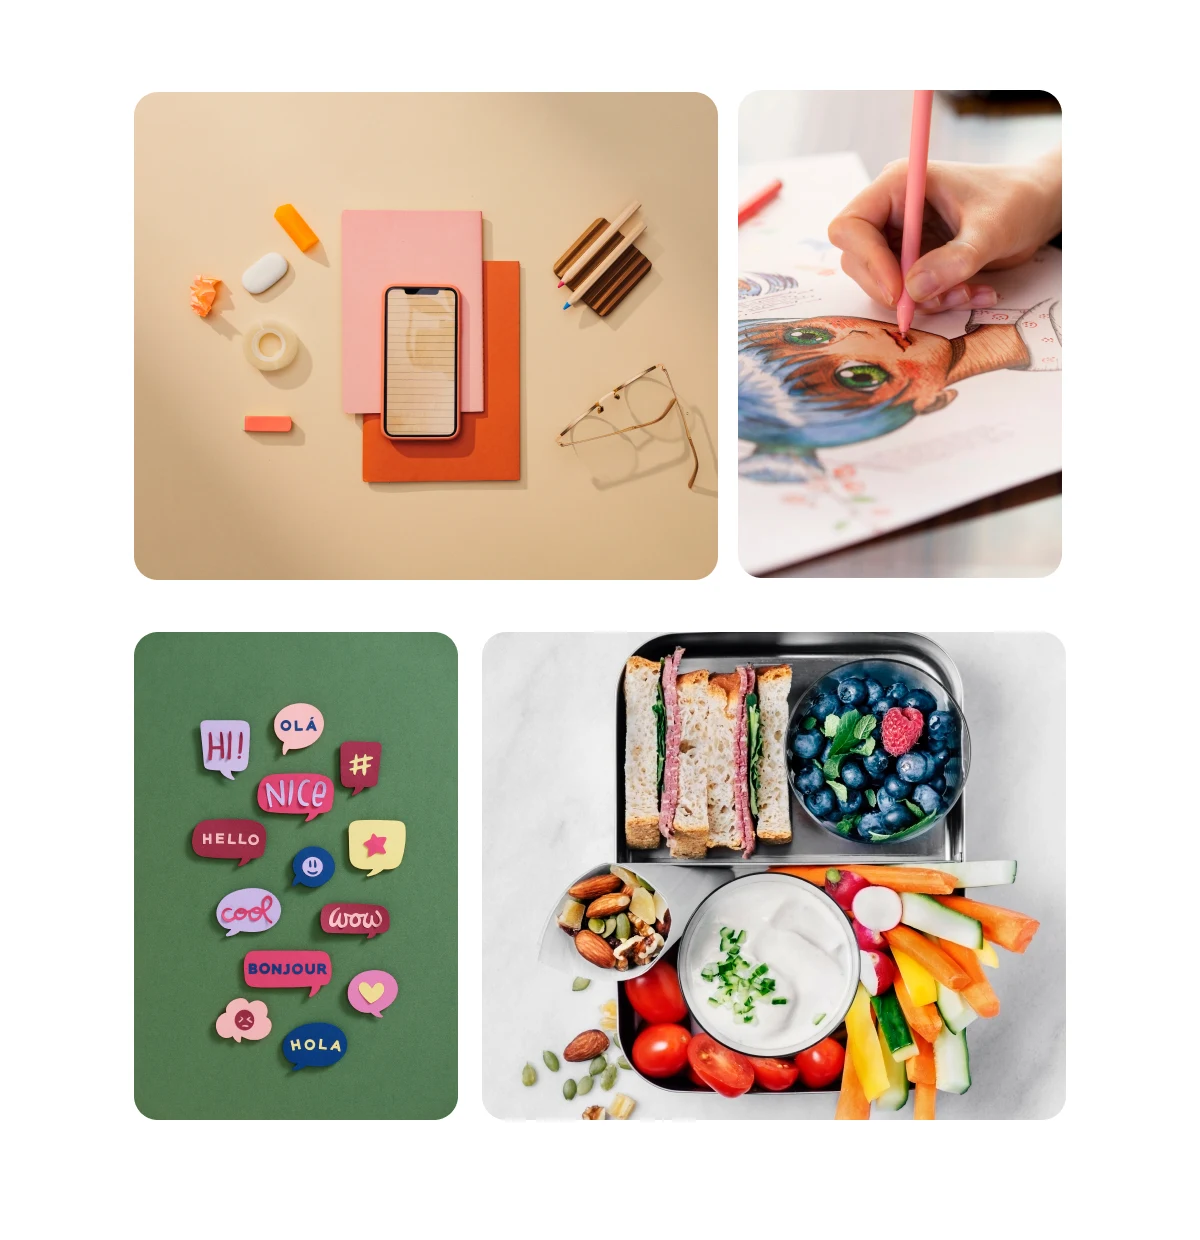 Grid of four images including study tips, fan art drawings, aesthetic phone cases, lunch box ideas